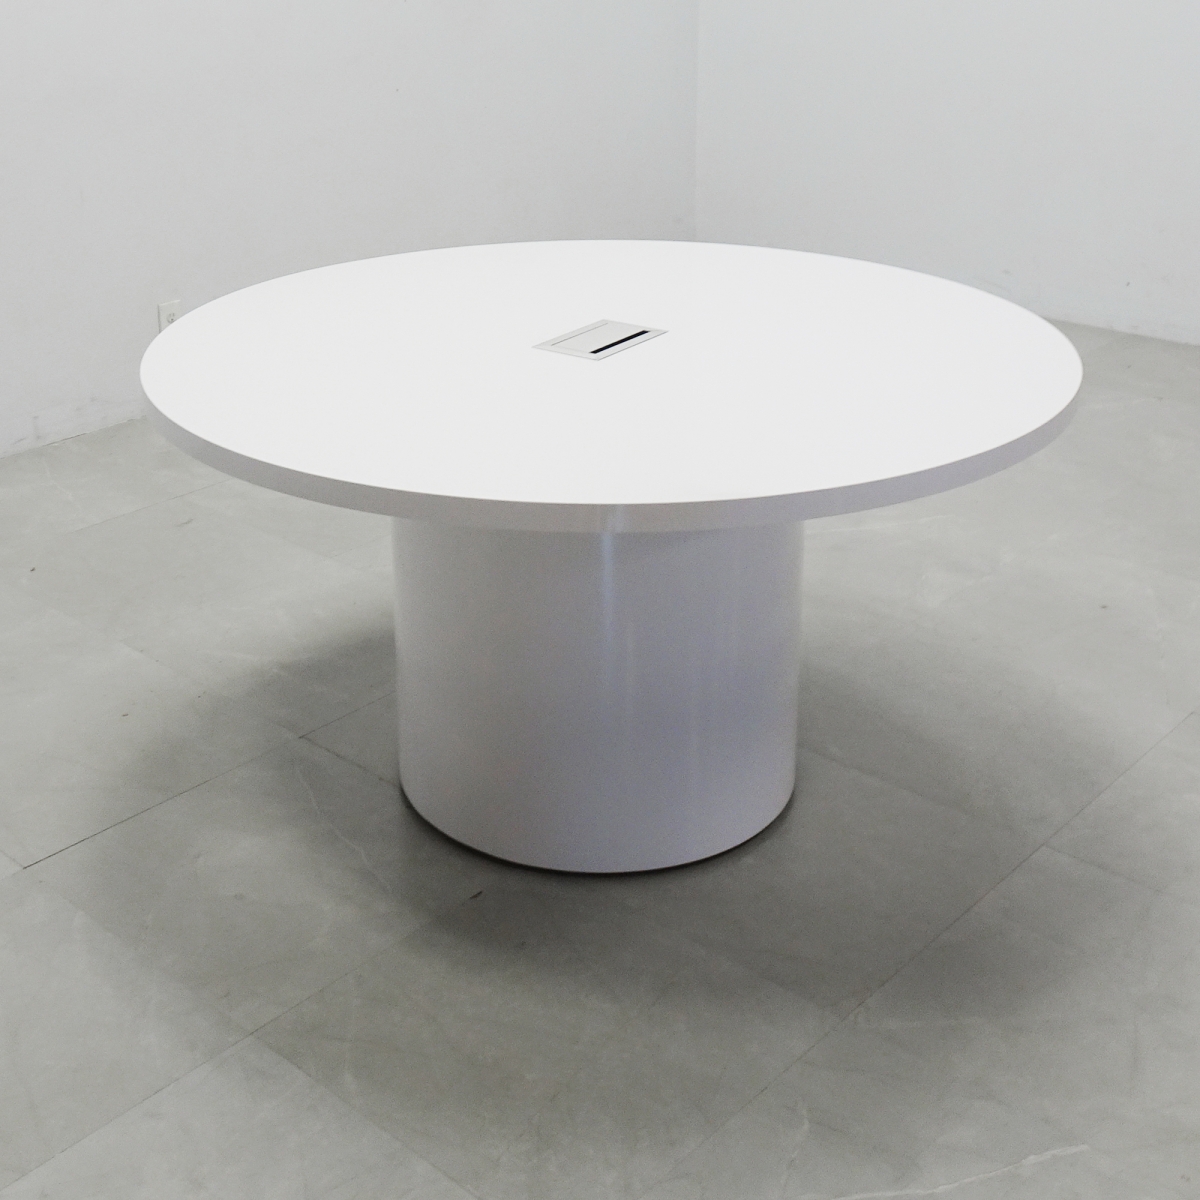 60 In. Axis Round Gloss Meeting Table -Stock # 1001-D